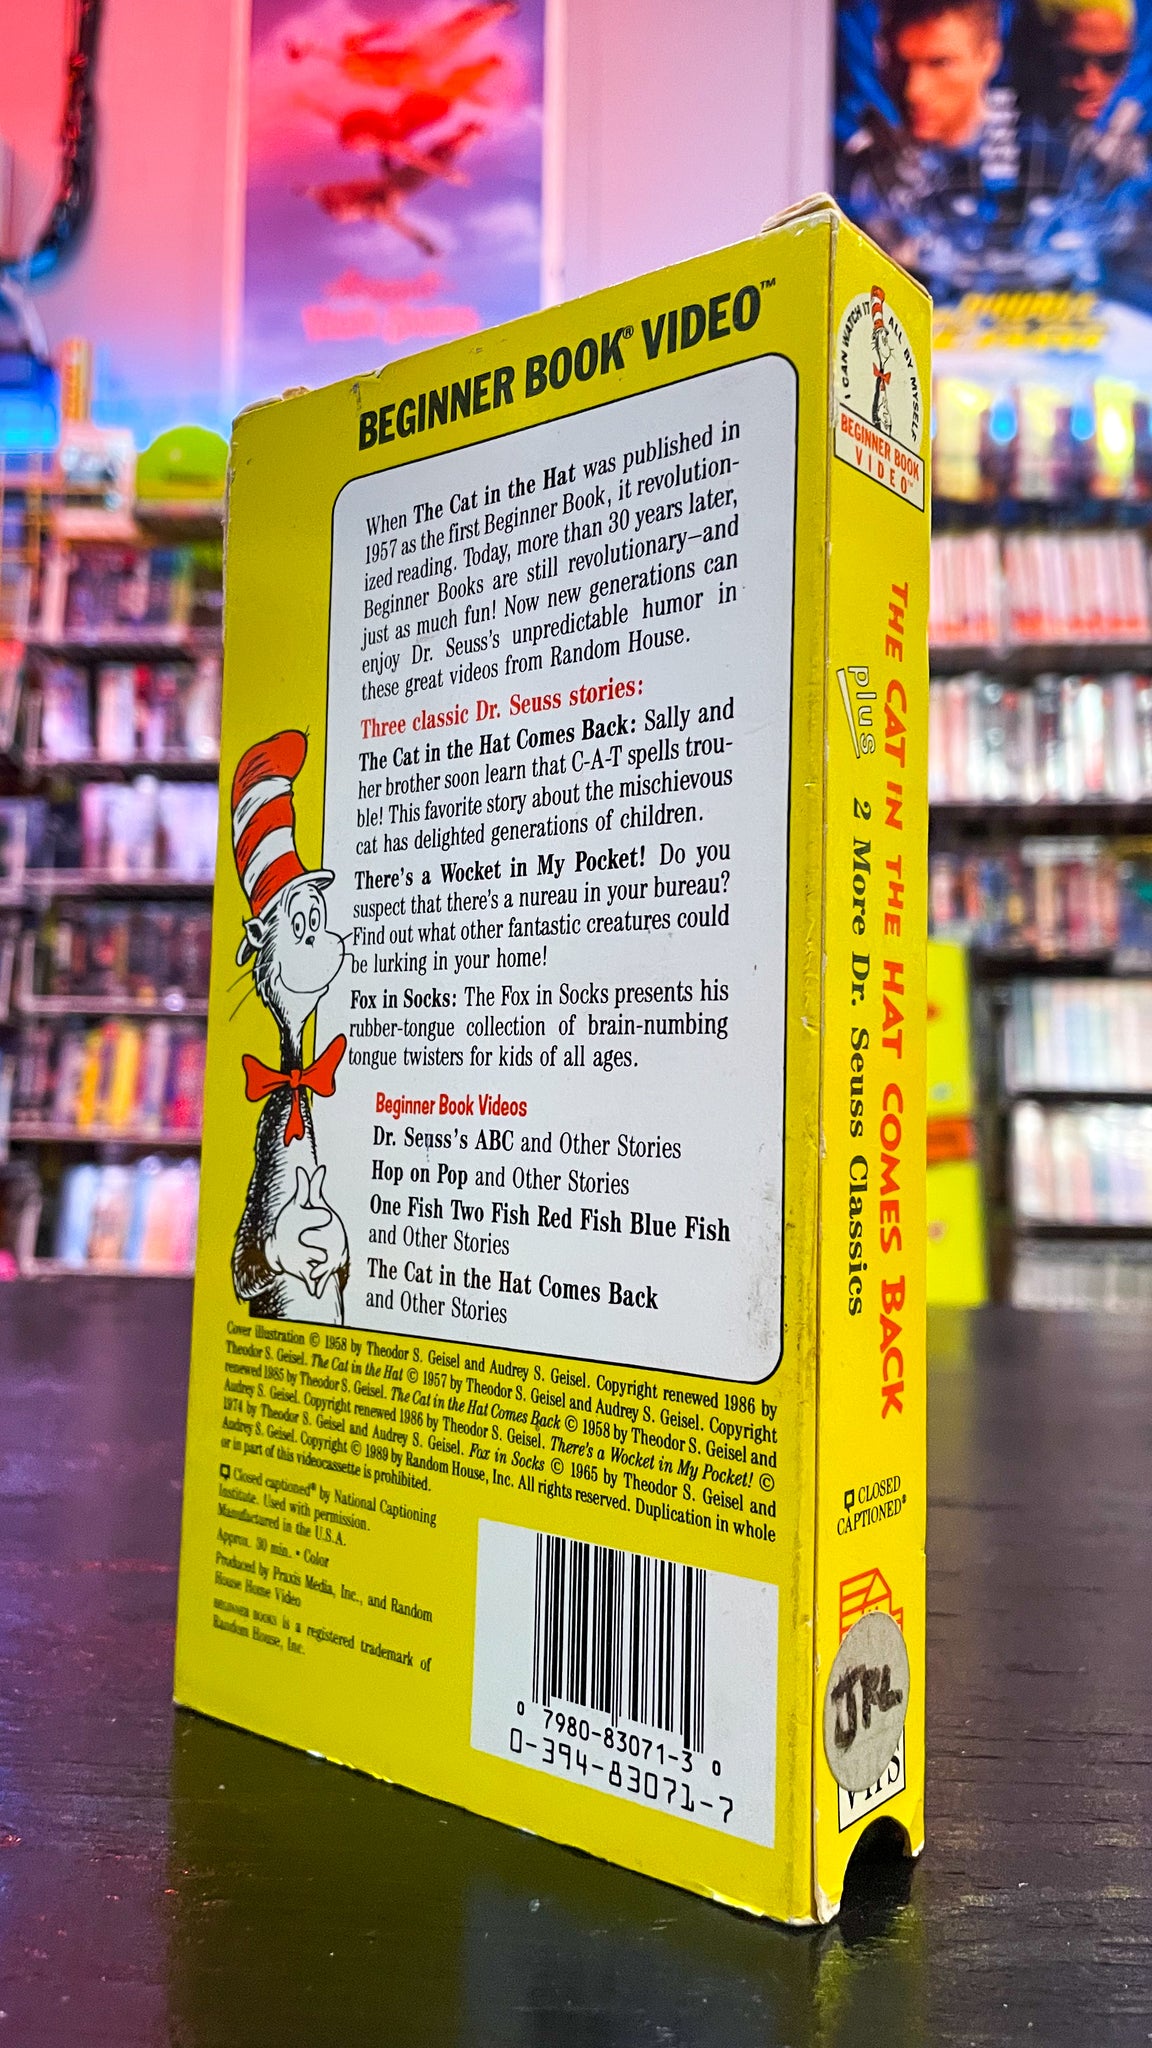 Dr. Seuss: The Cat in the Hat Comes Back